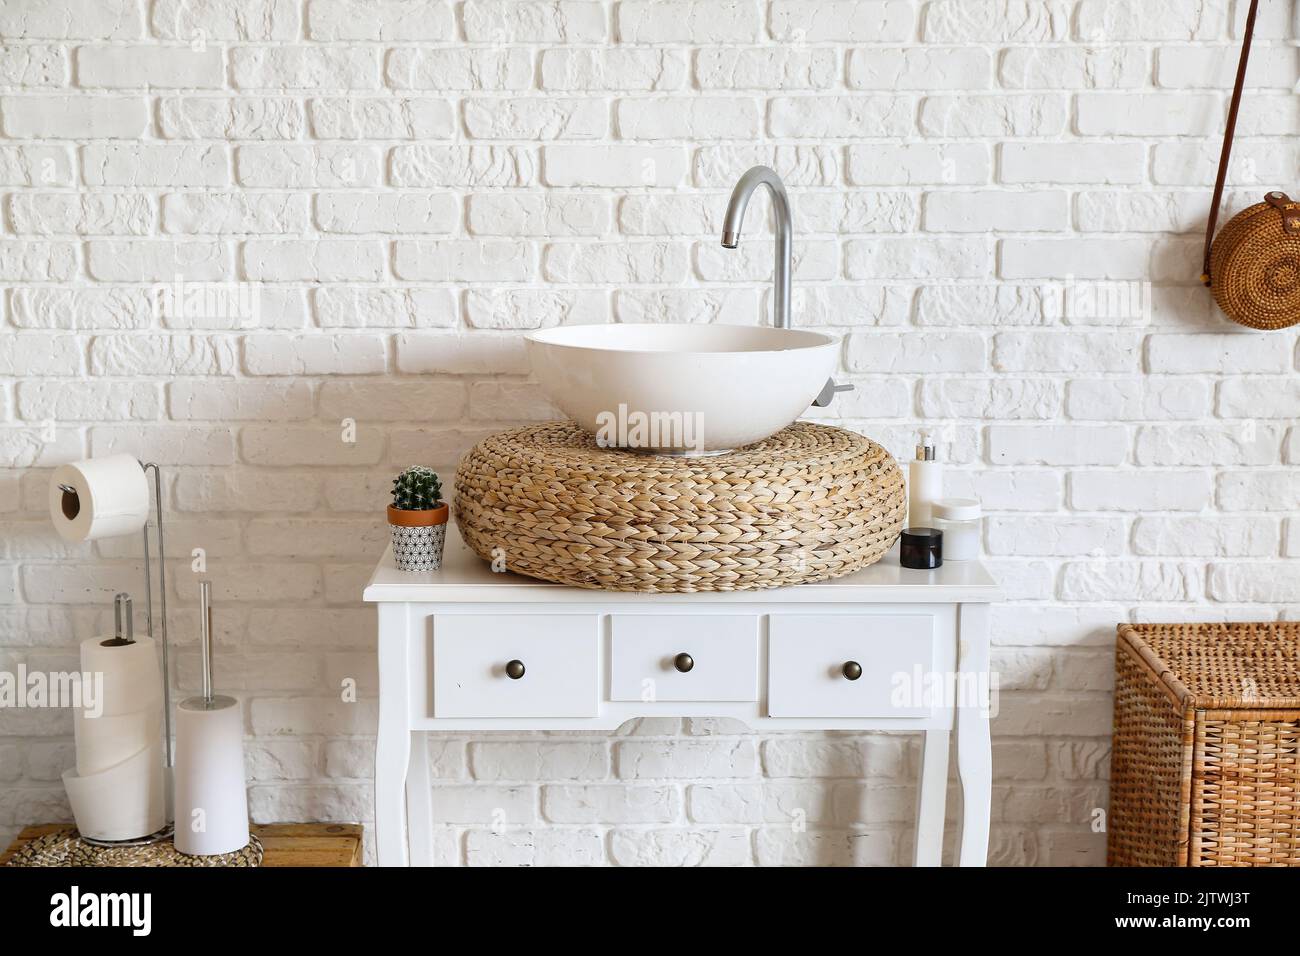 Table with sink, rattan pouf and cosmetic products near white brick wall Stock Photo